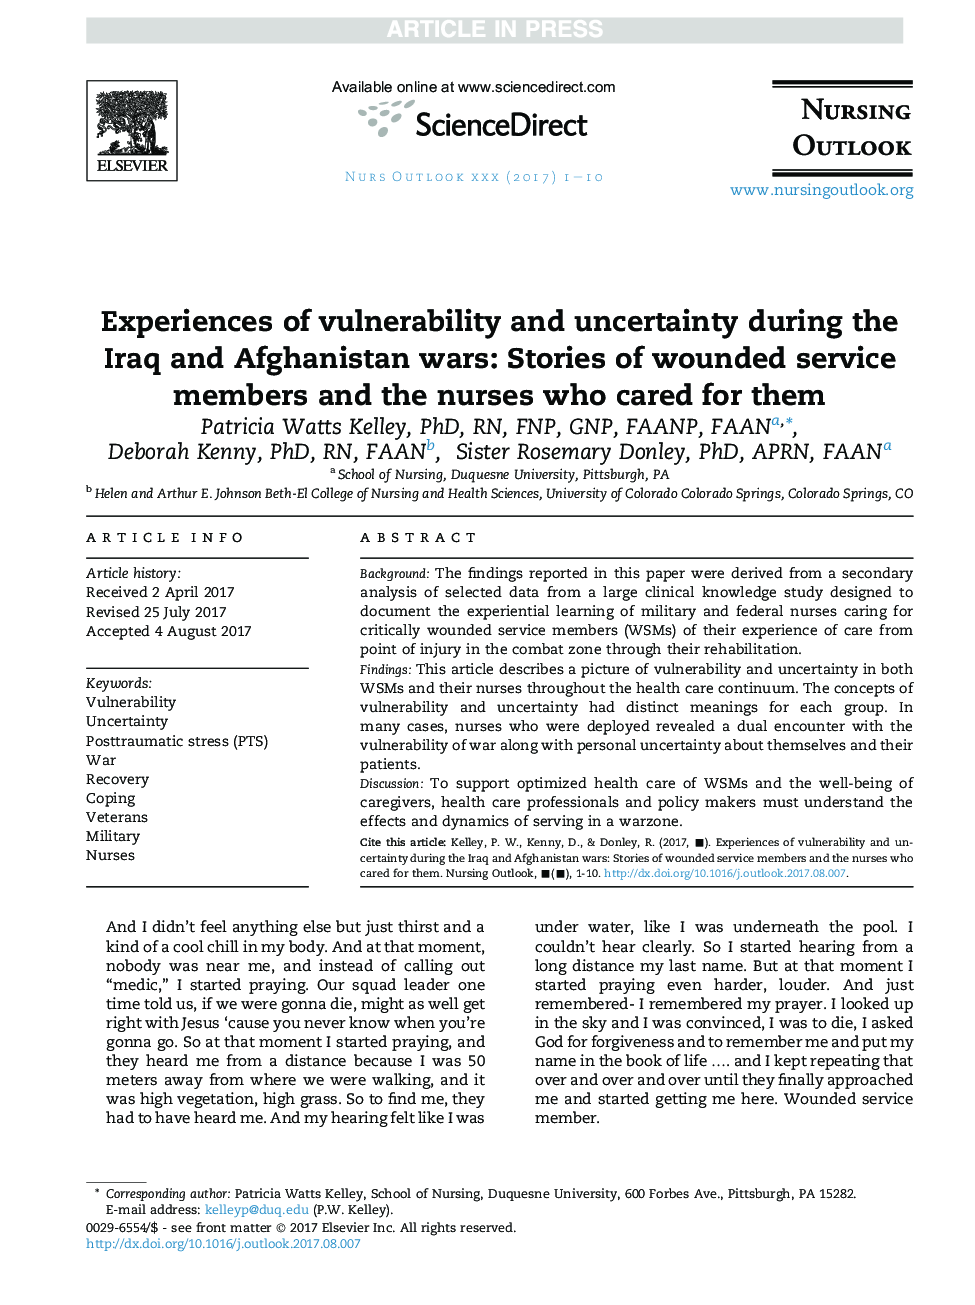 Experiences of vulnerability and uncertainty during the Iraq and Afghanistan wars: Stories of wounded service members and the nurses who cared for them